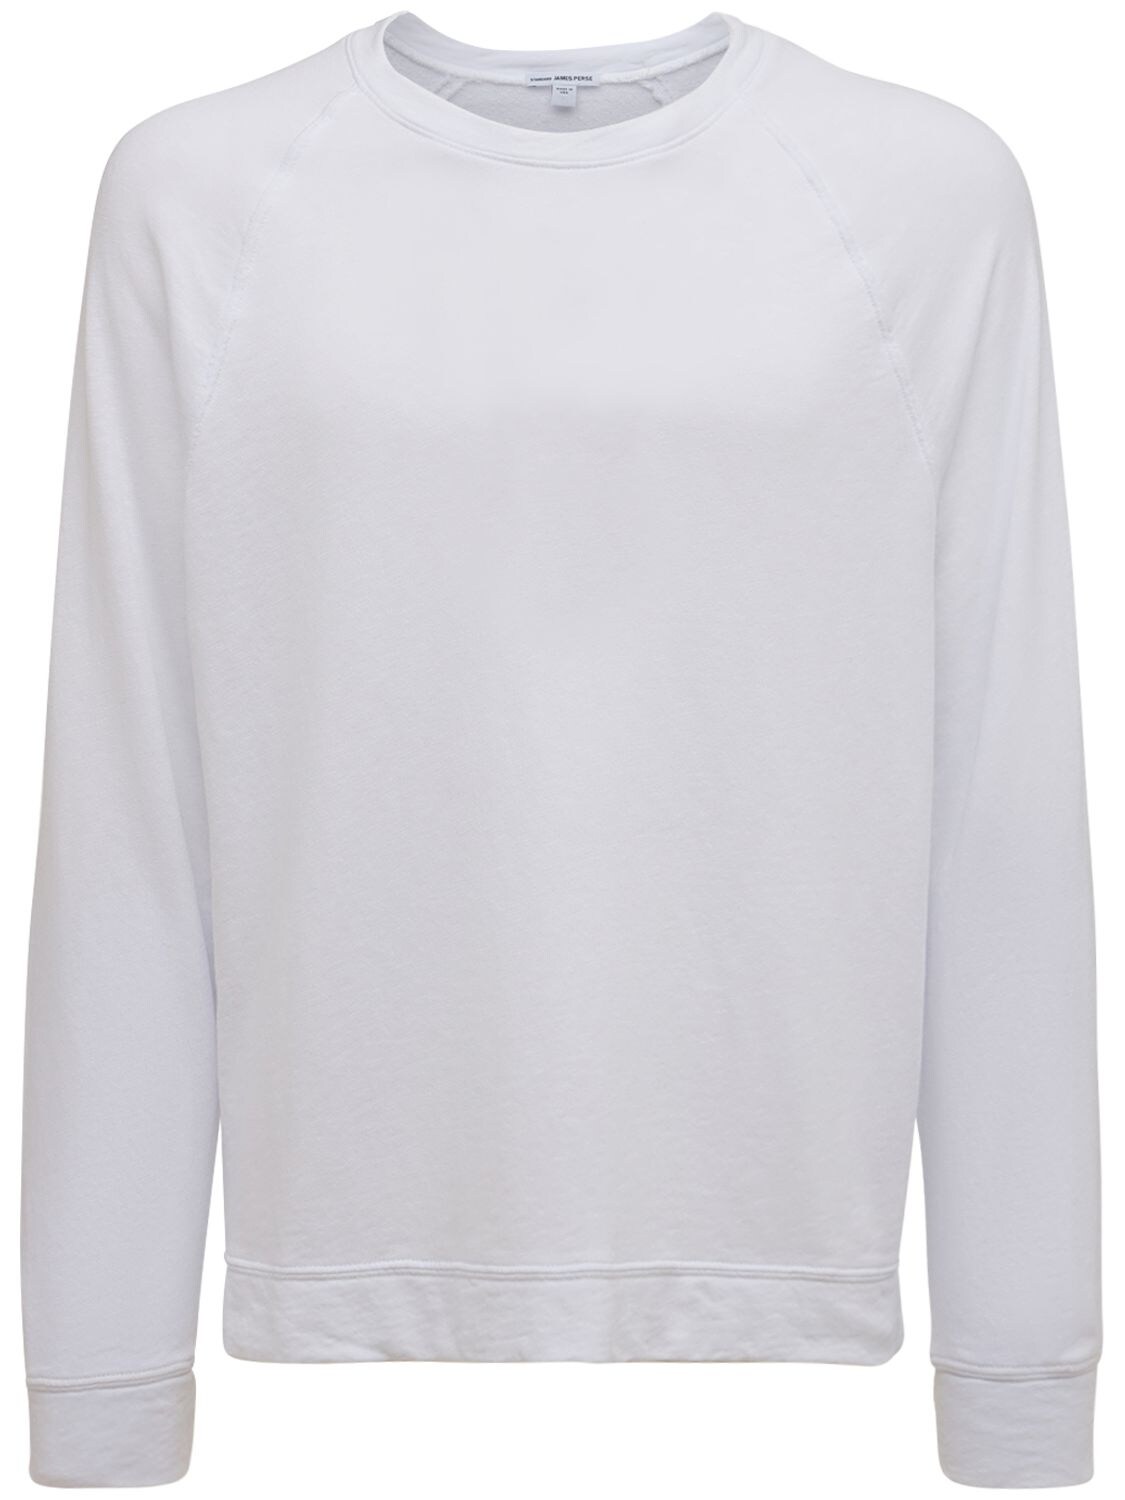 James Perse Vintage Cotton French Terry Sweatshirt In White